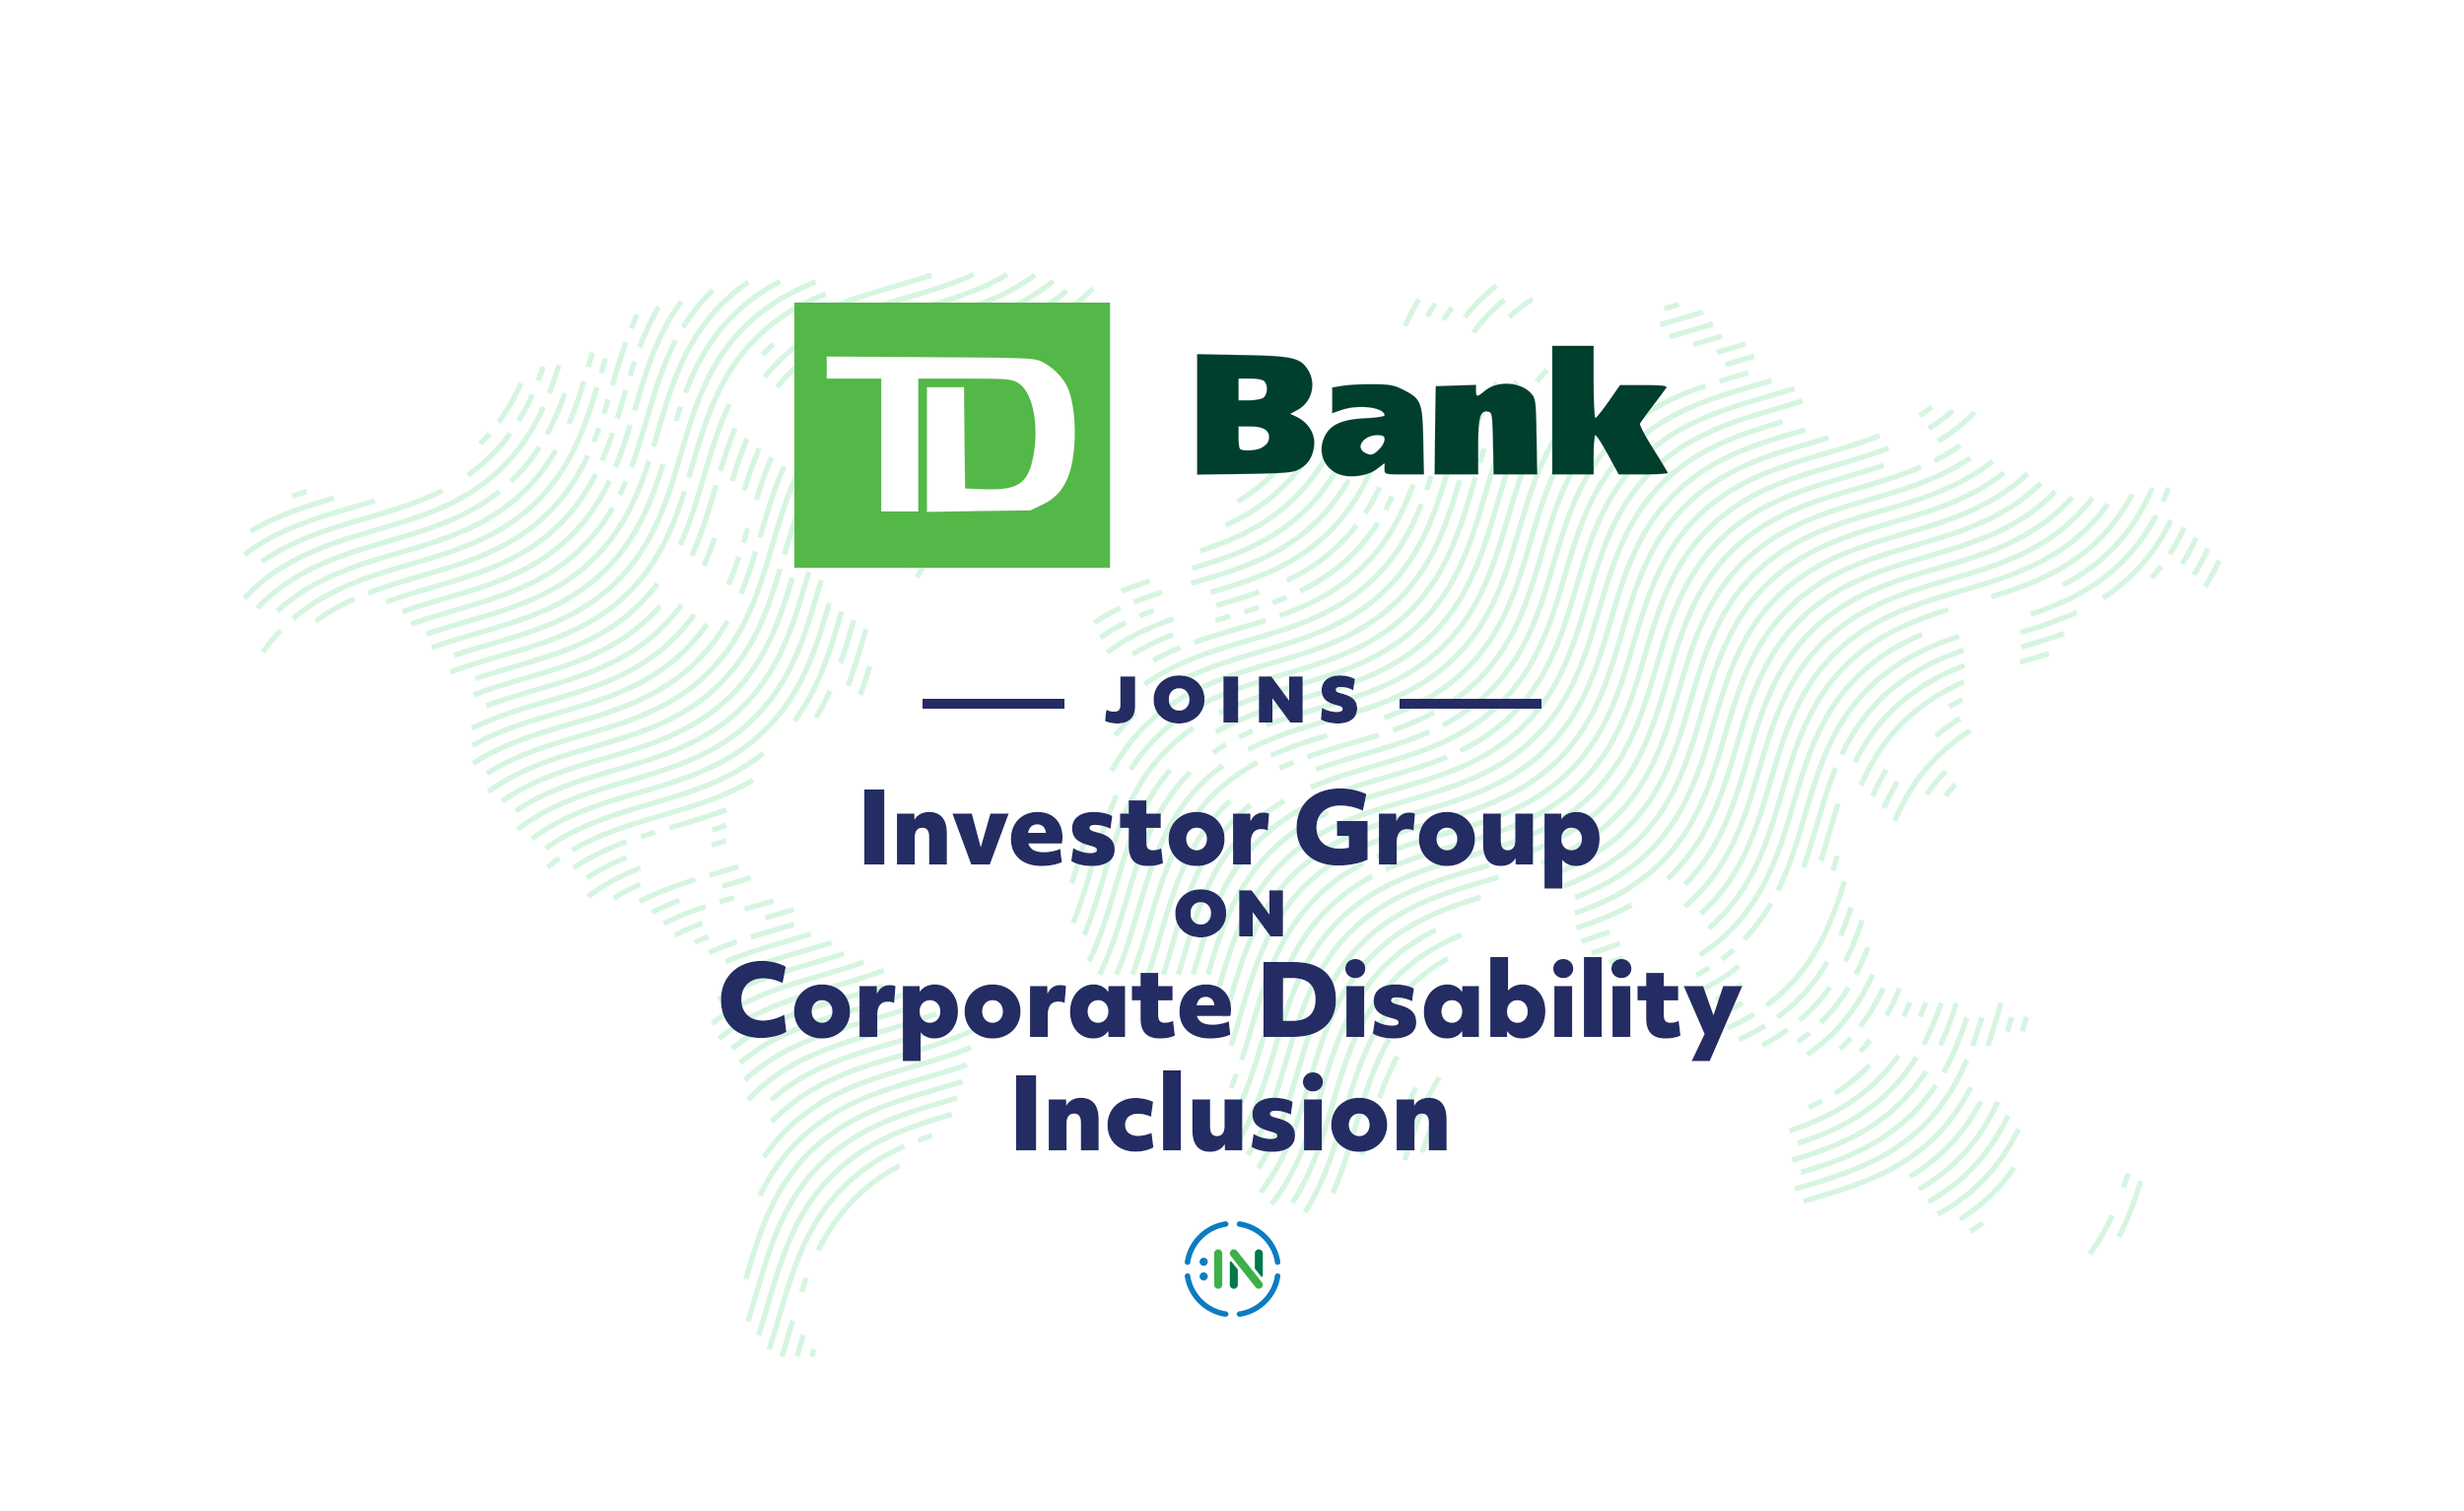 TD Bank joins Investor Group on Corporate Disability Inclusion